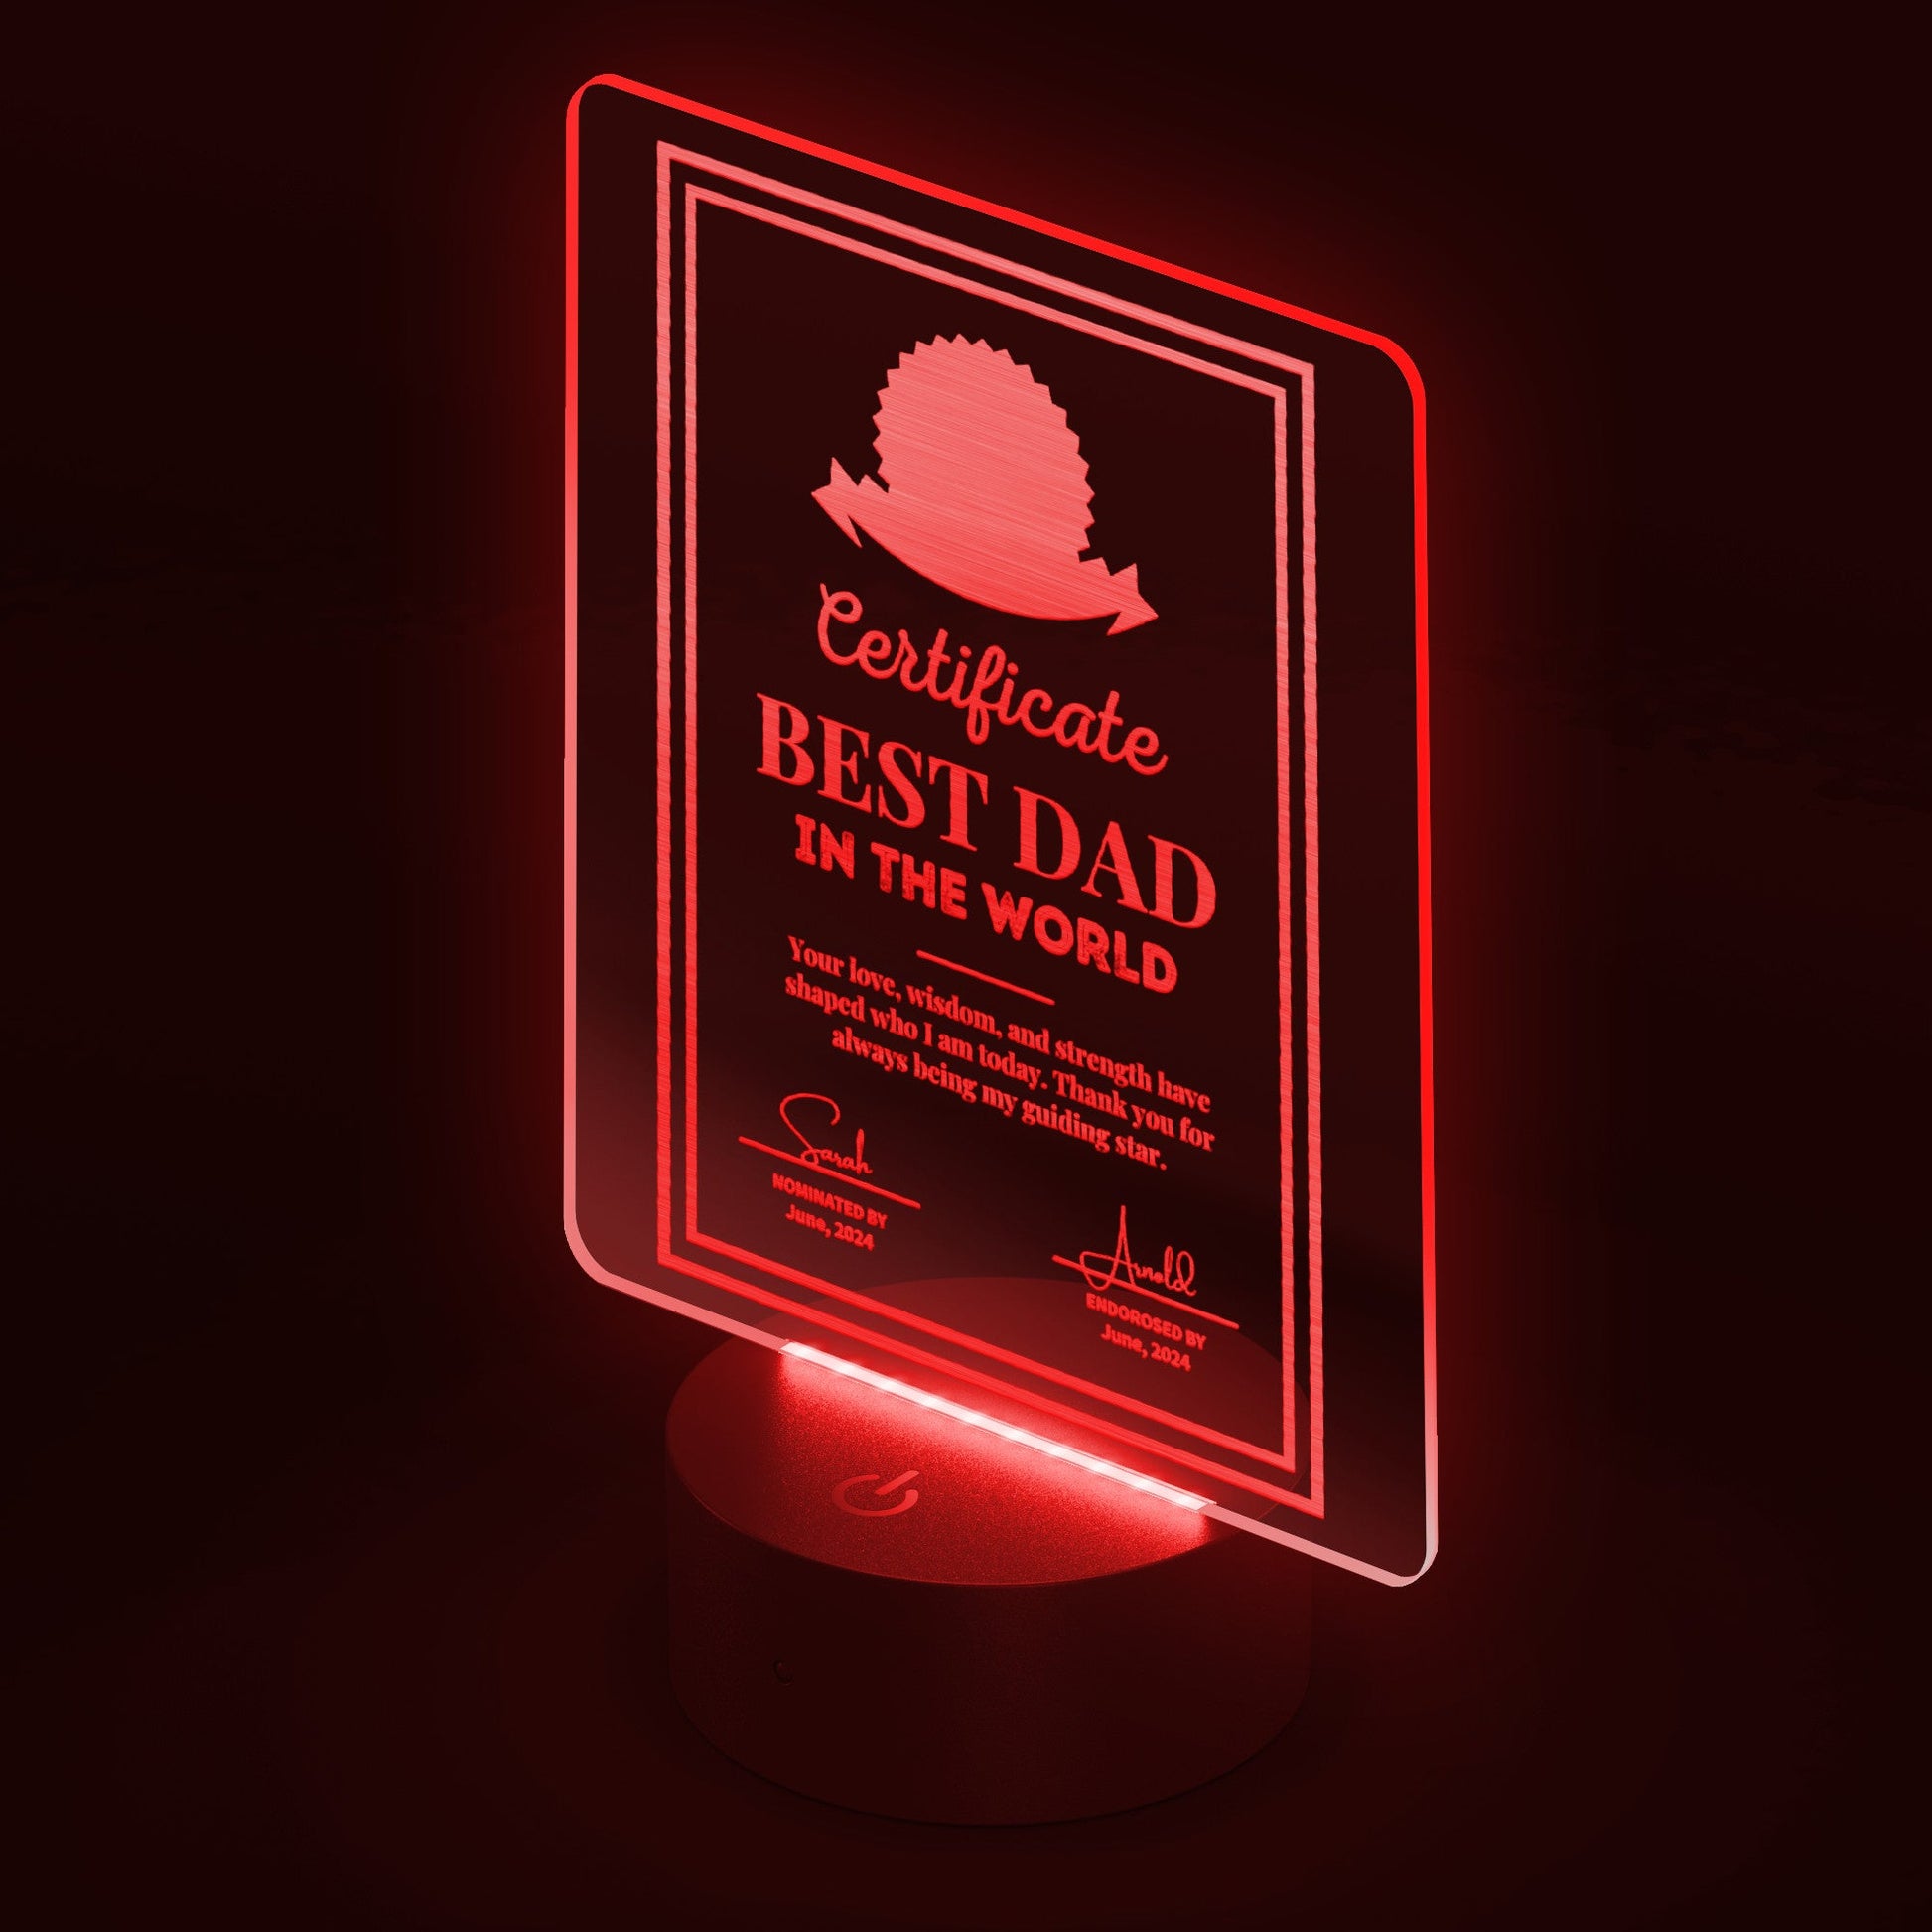 Personalized LED Signs - Best Dad Award Acrylic LED Plaque 